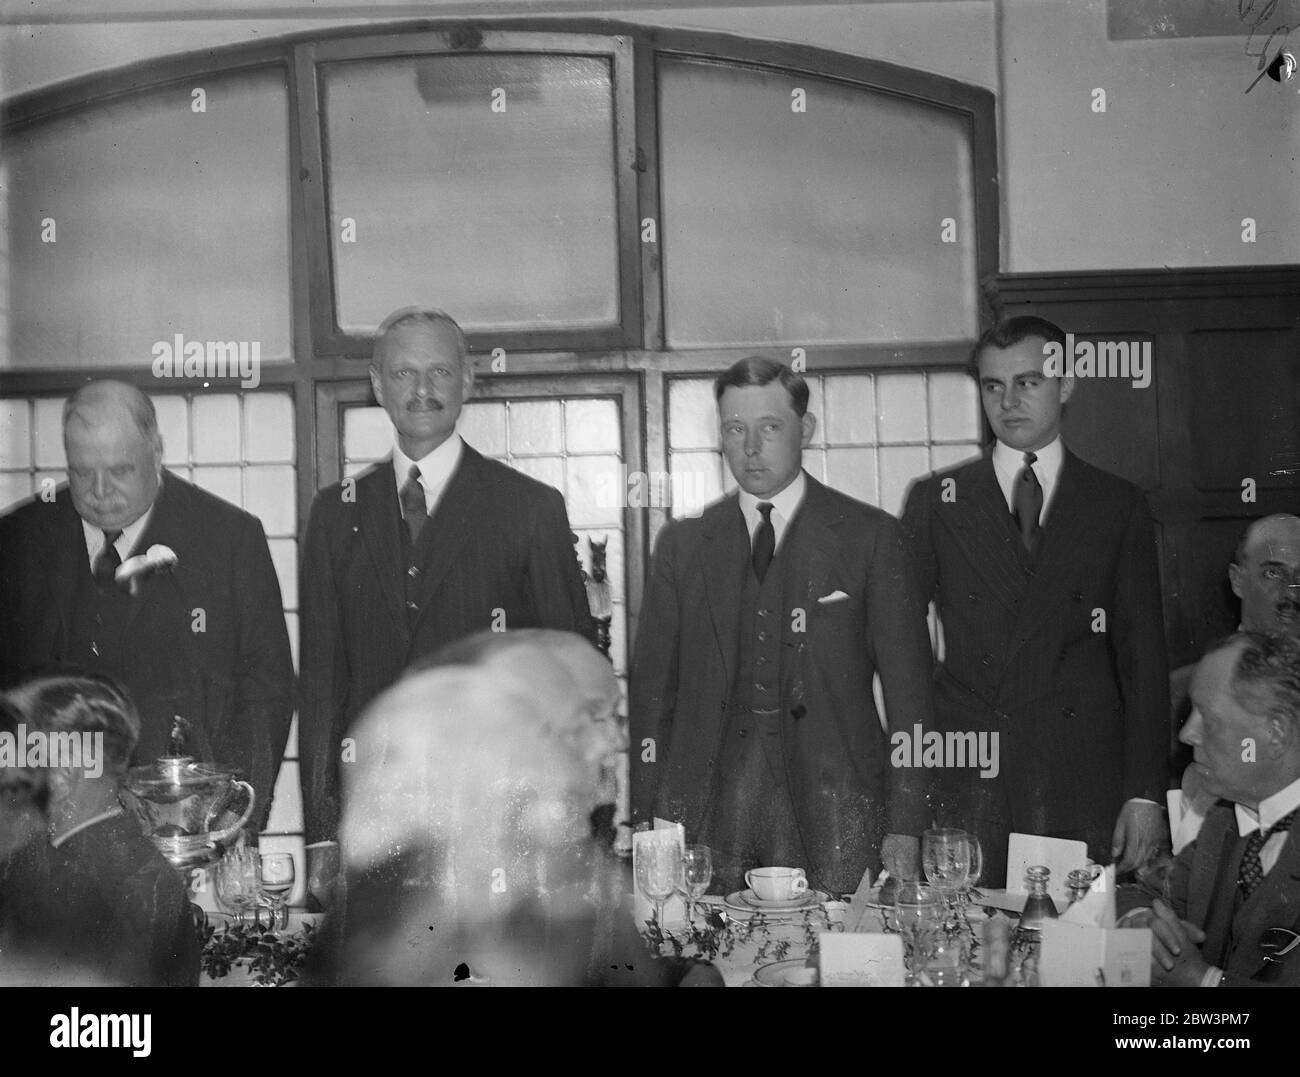 Press club Derby Luncheon . Lord Derby , the Duke of Norfolk and the Marquess of Zetland attended the Press Club Derby luncheon at the Press Club . Photo shows , left to right , Lord Derby , Major Astor , ( Chairmen ) , the Duke of Norfolk and Prince Aly Khan , son of the Aga Khan . 26 May 1936 Stock Photo